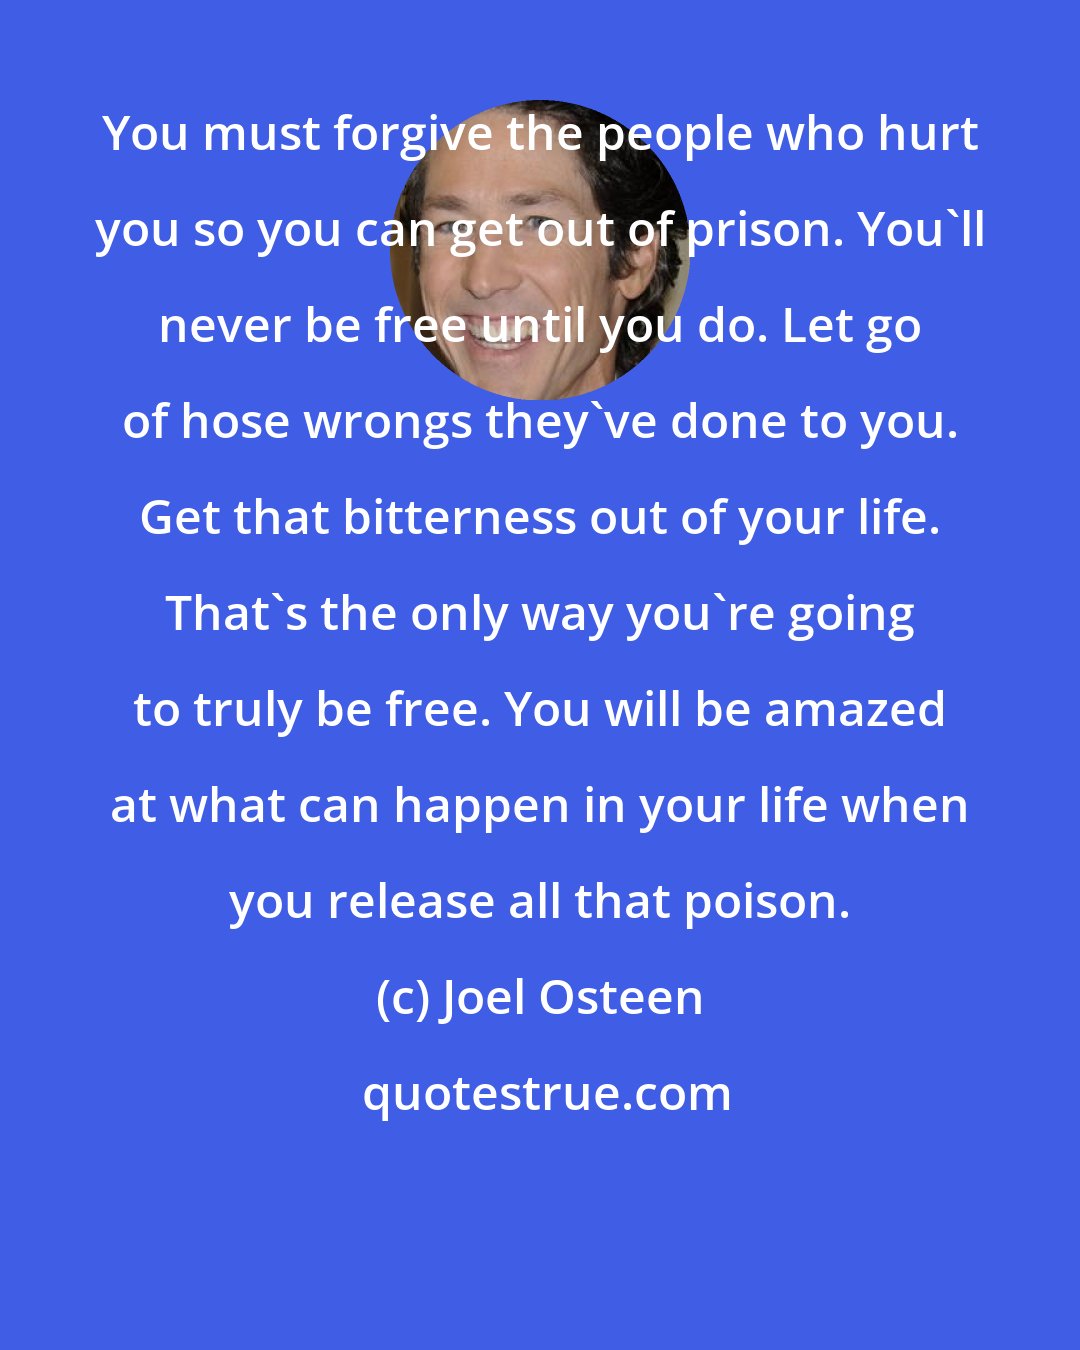 Joel Osteen: You must forgive the people who hurt you so you can get out of prison. You'll never be free until you do. Let go of hose wrongs they've done to you. Get that bitterness out of your life. That's the only way you're going to truly be free. You will be amazed at what can happen in your life when you release all that poison.